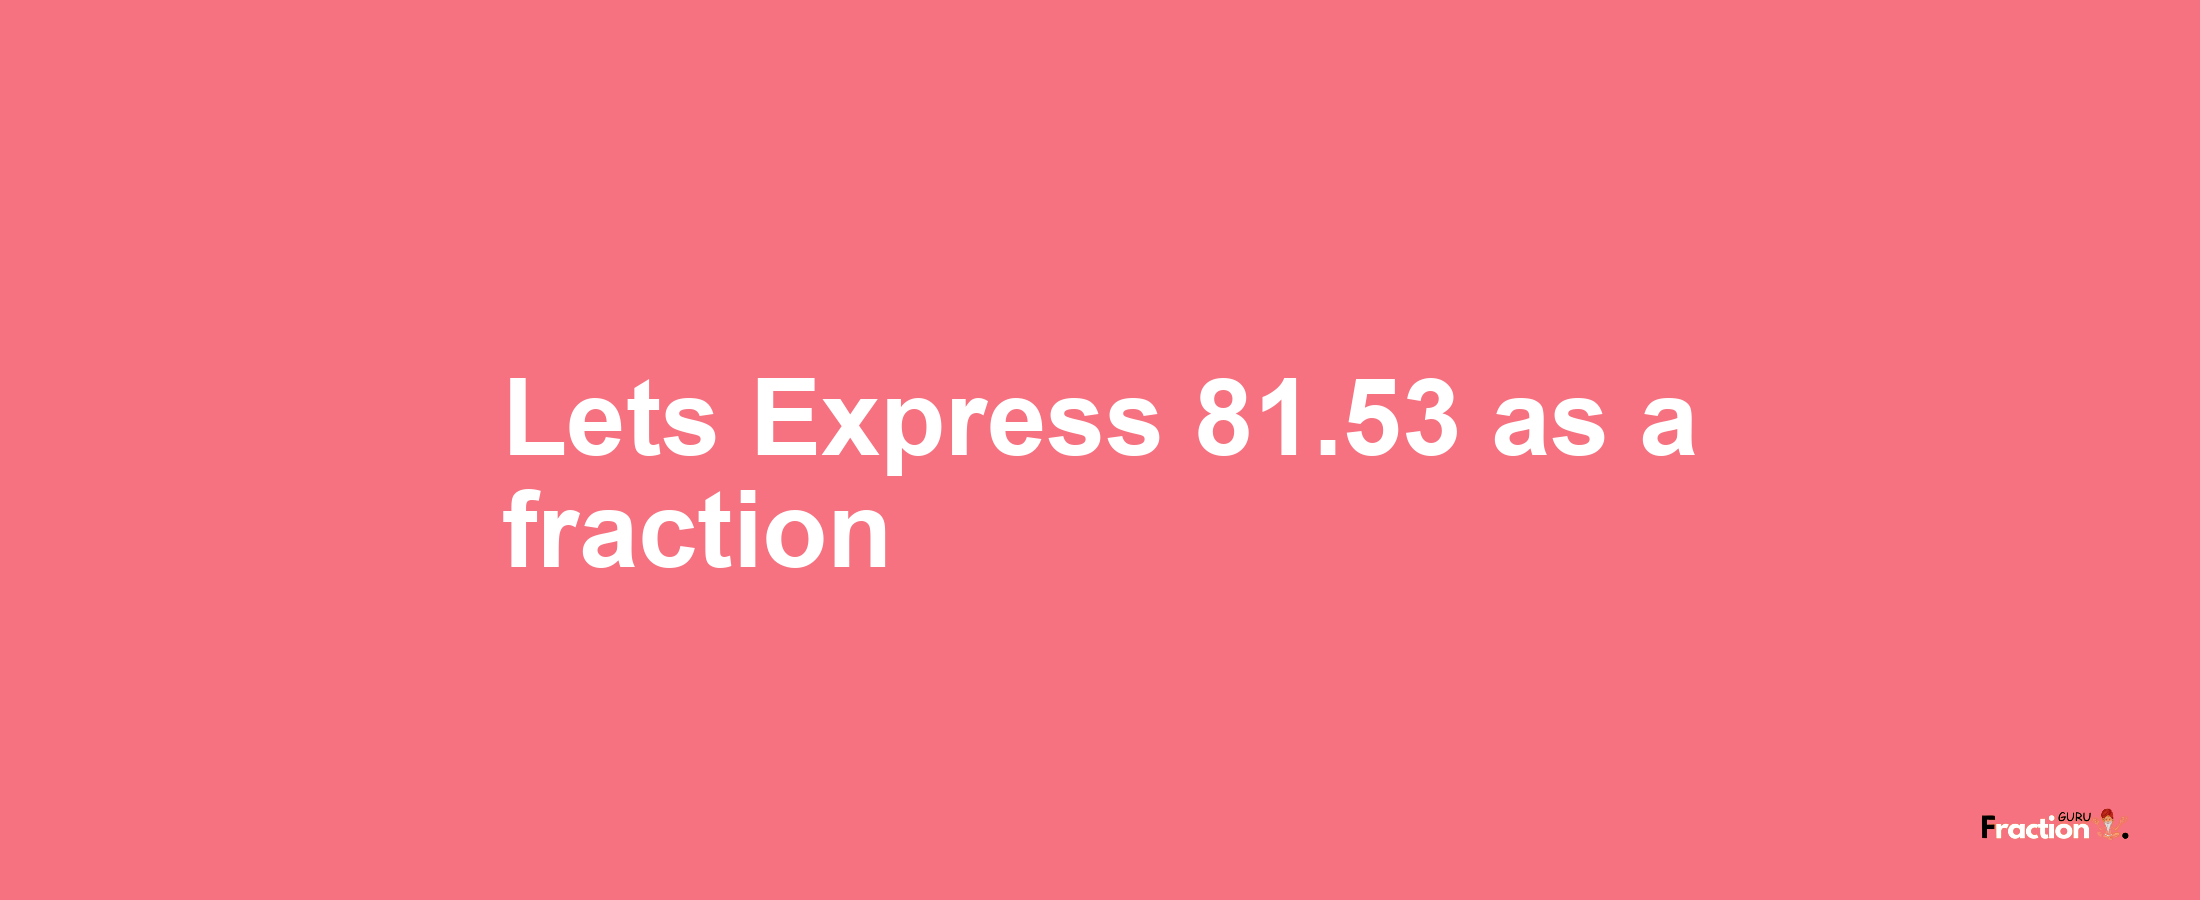 Lets Express 81.53 as afraction